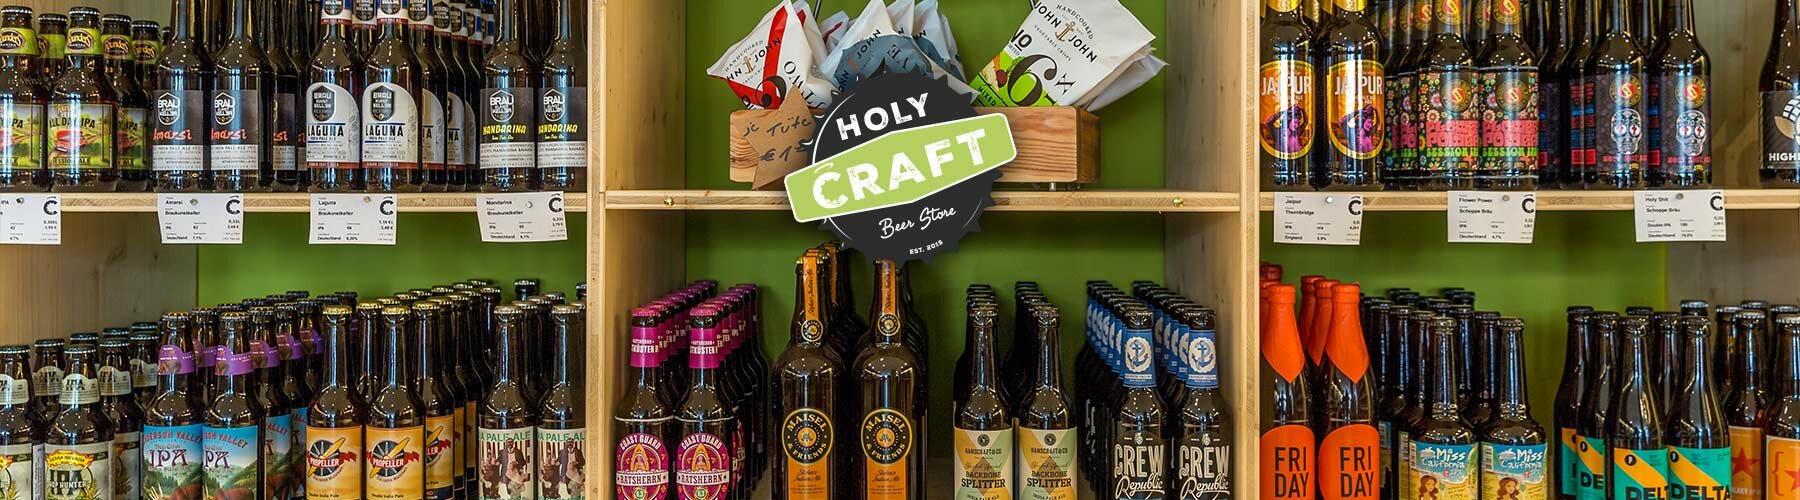 Holy Craft Beer Store